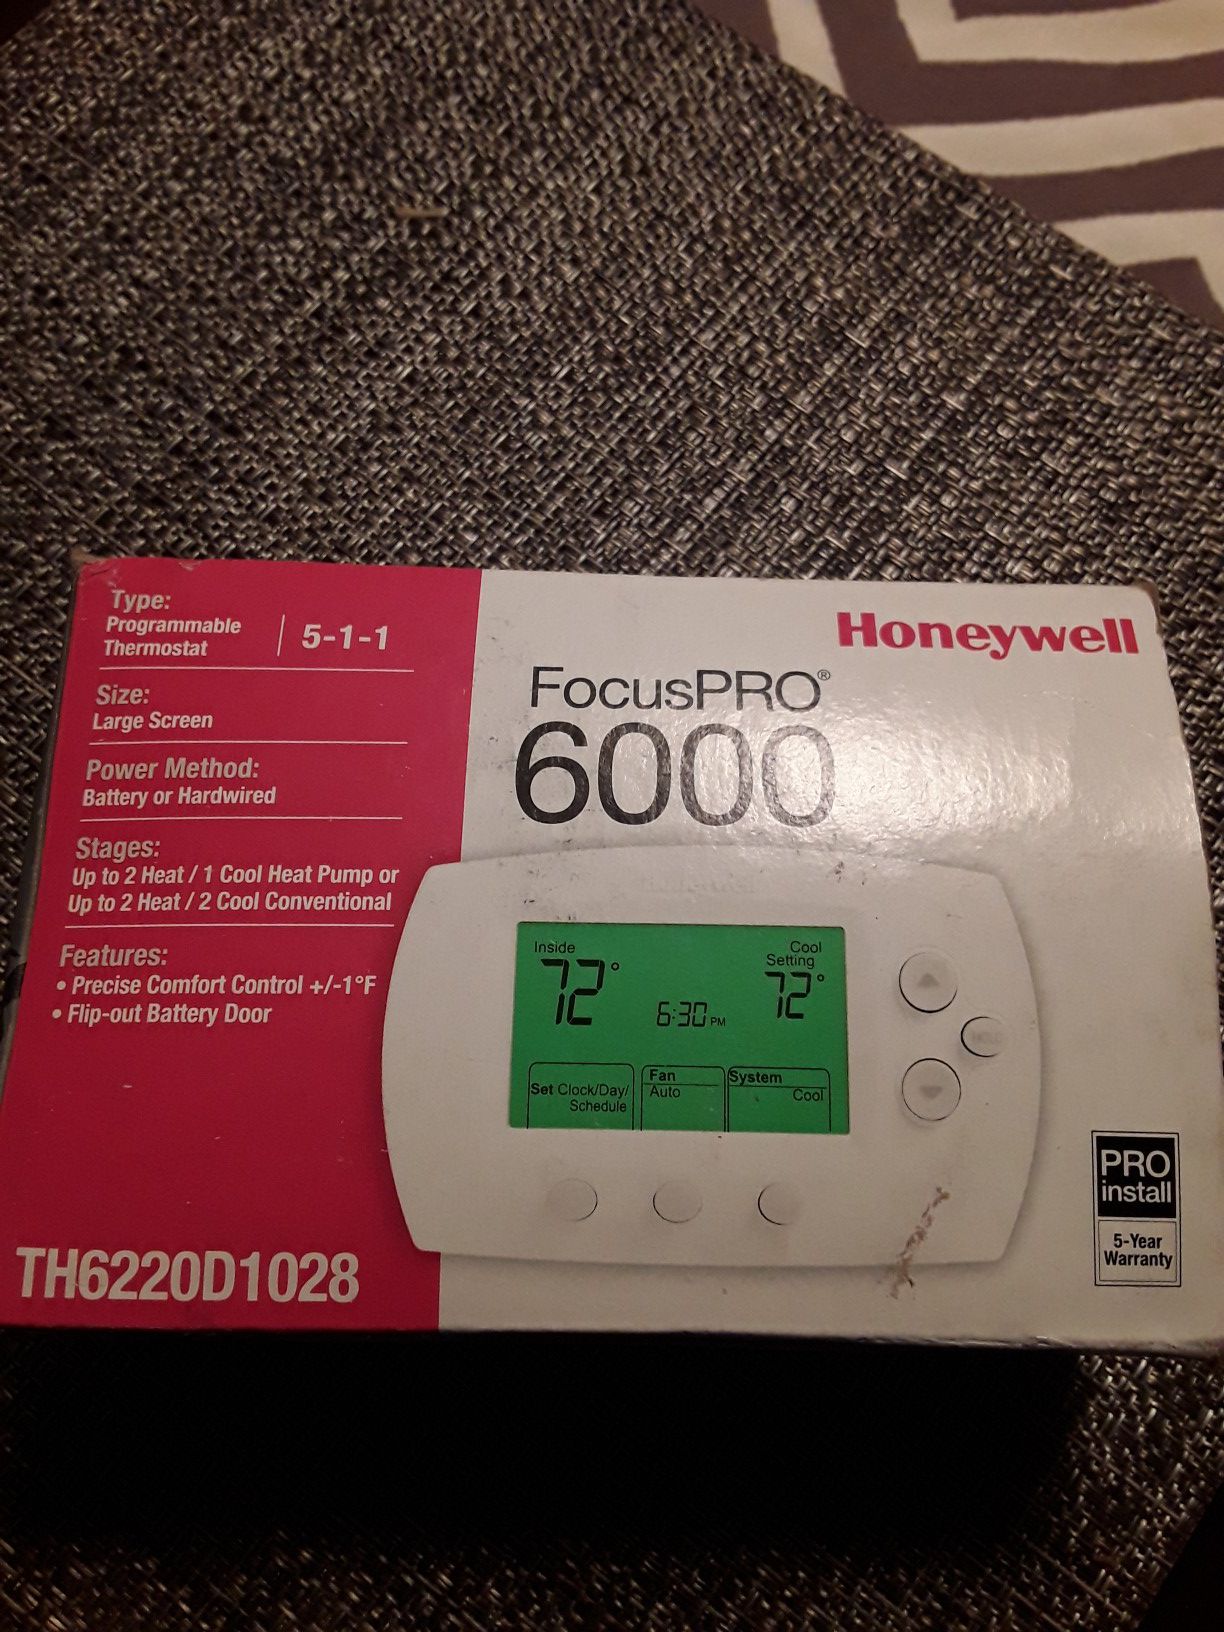 Honneywell FocusPRO TH6220D1028 Programable Thermostat (Yes it's available)